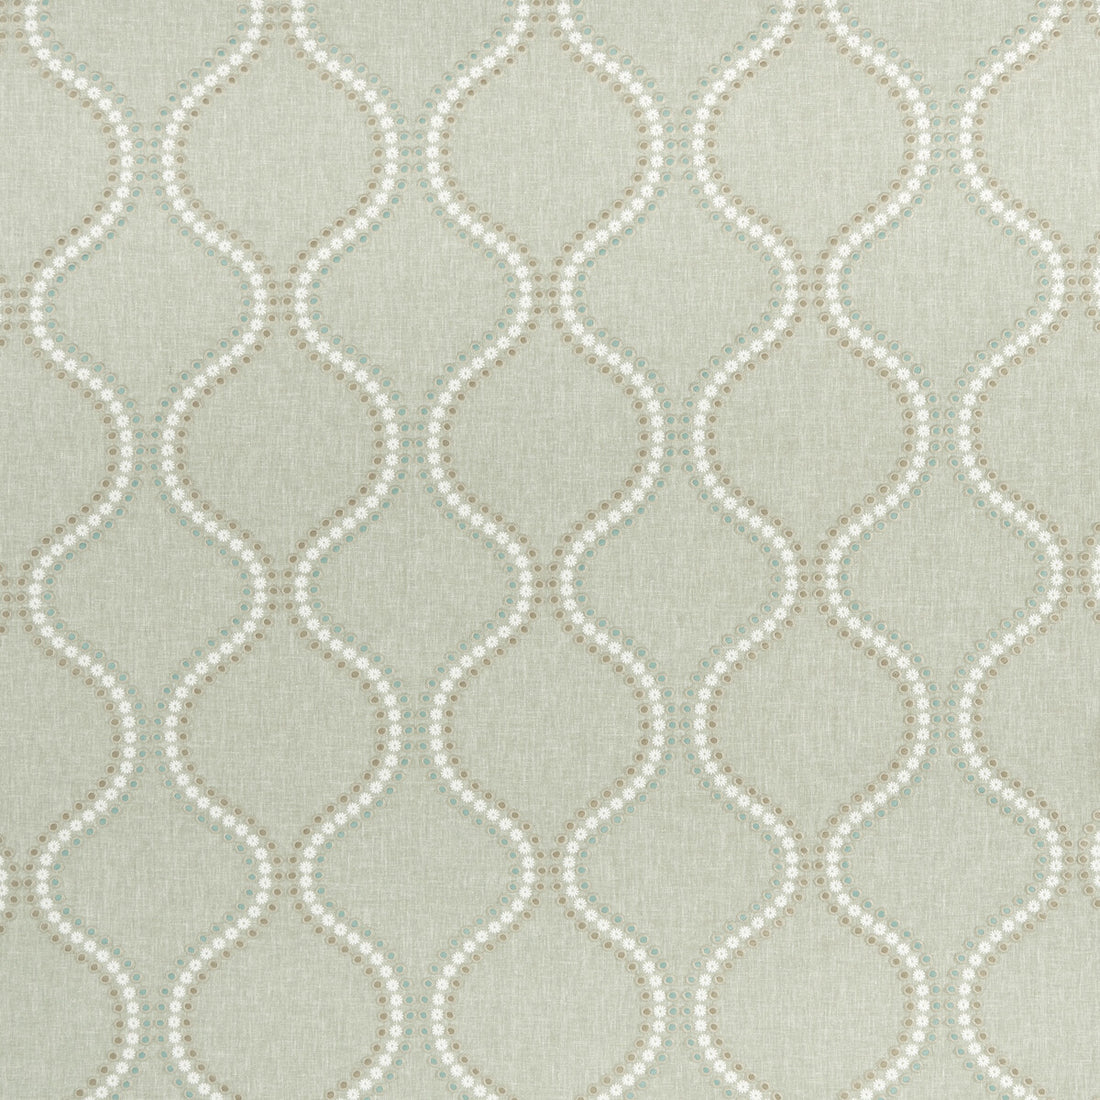 Layton fabric in duckegg color - pattern F1006/03.CAC.0 - by Clarke And Clarke in the Clarke &amp; Clarke Halcyon collection